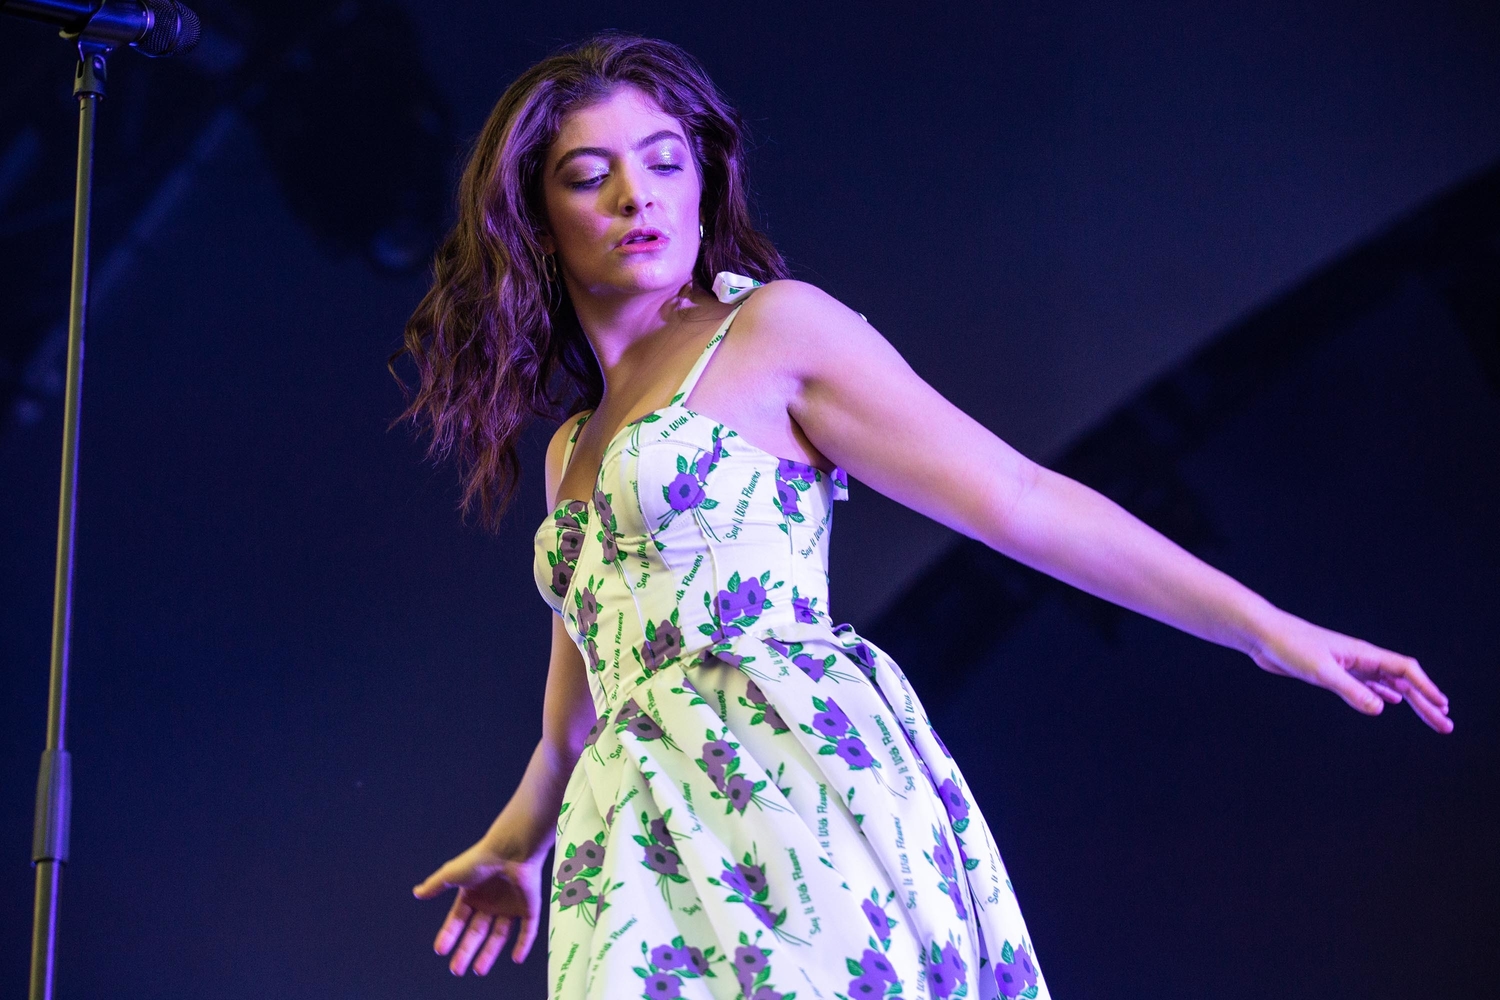 The xx and Lorde bring emotional hammerblows to an electrifying second day of All Points East